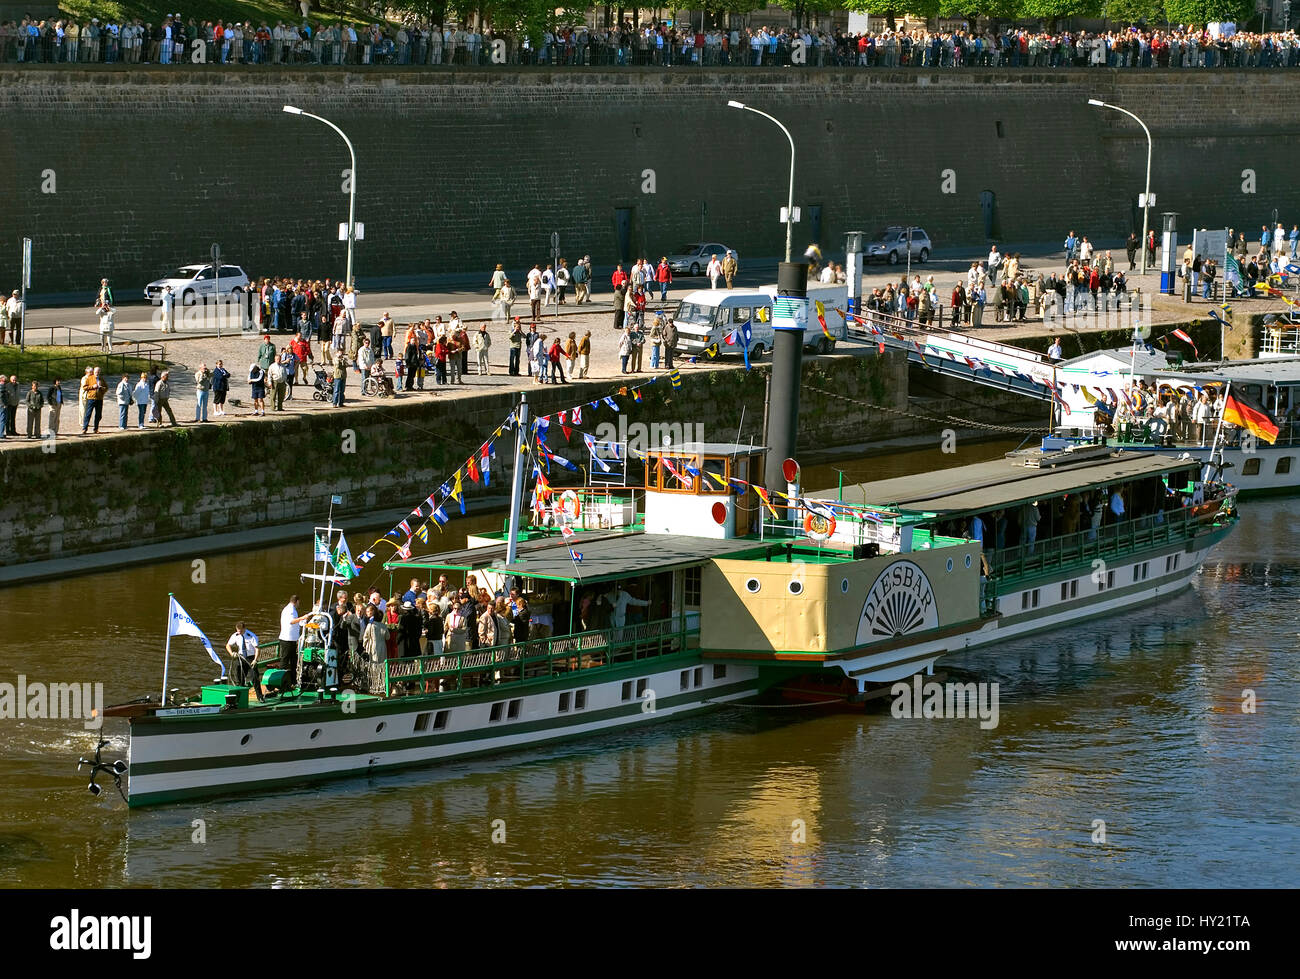 This image shows a sigle steam ship during the famous annual steam ship parade on the Elbe River near the old town of Dresden in Germany. Stock Photo